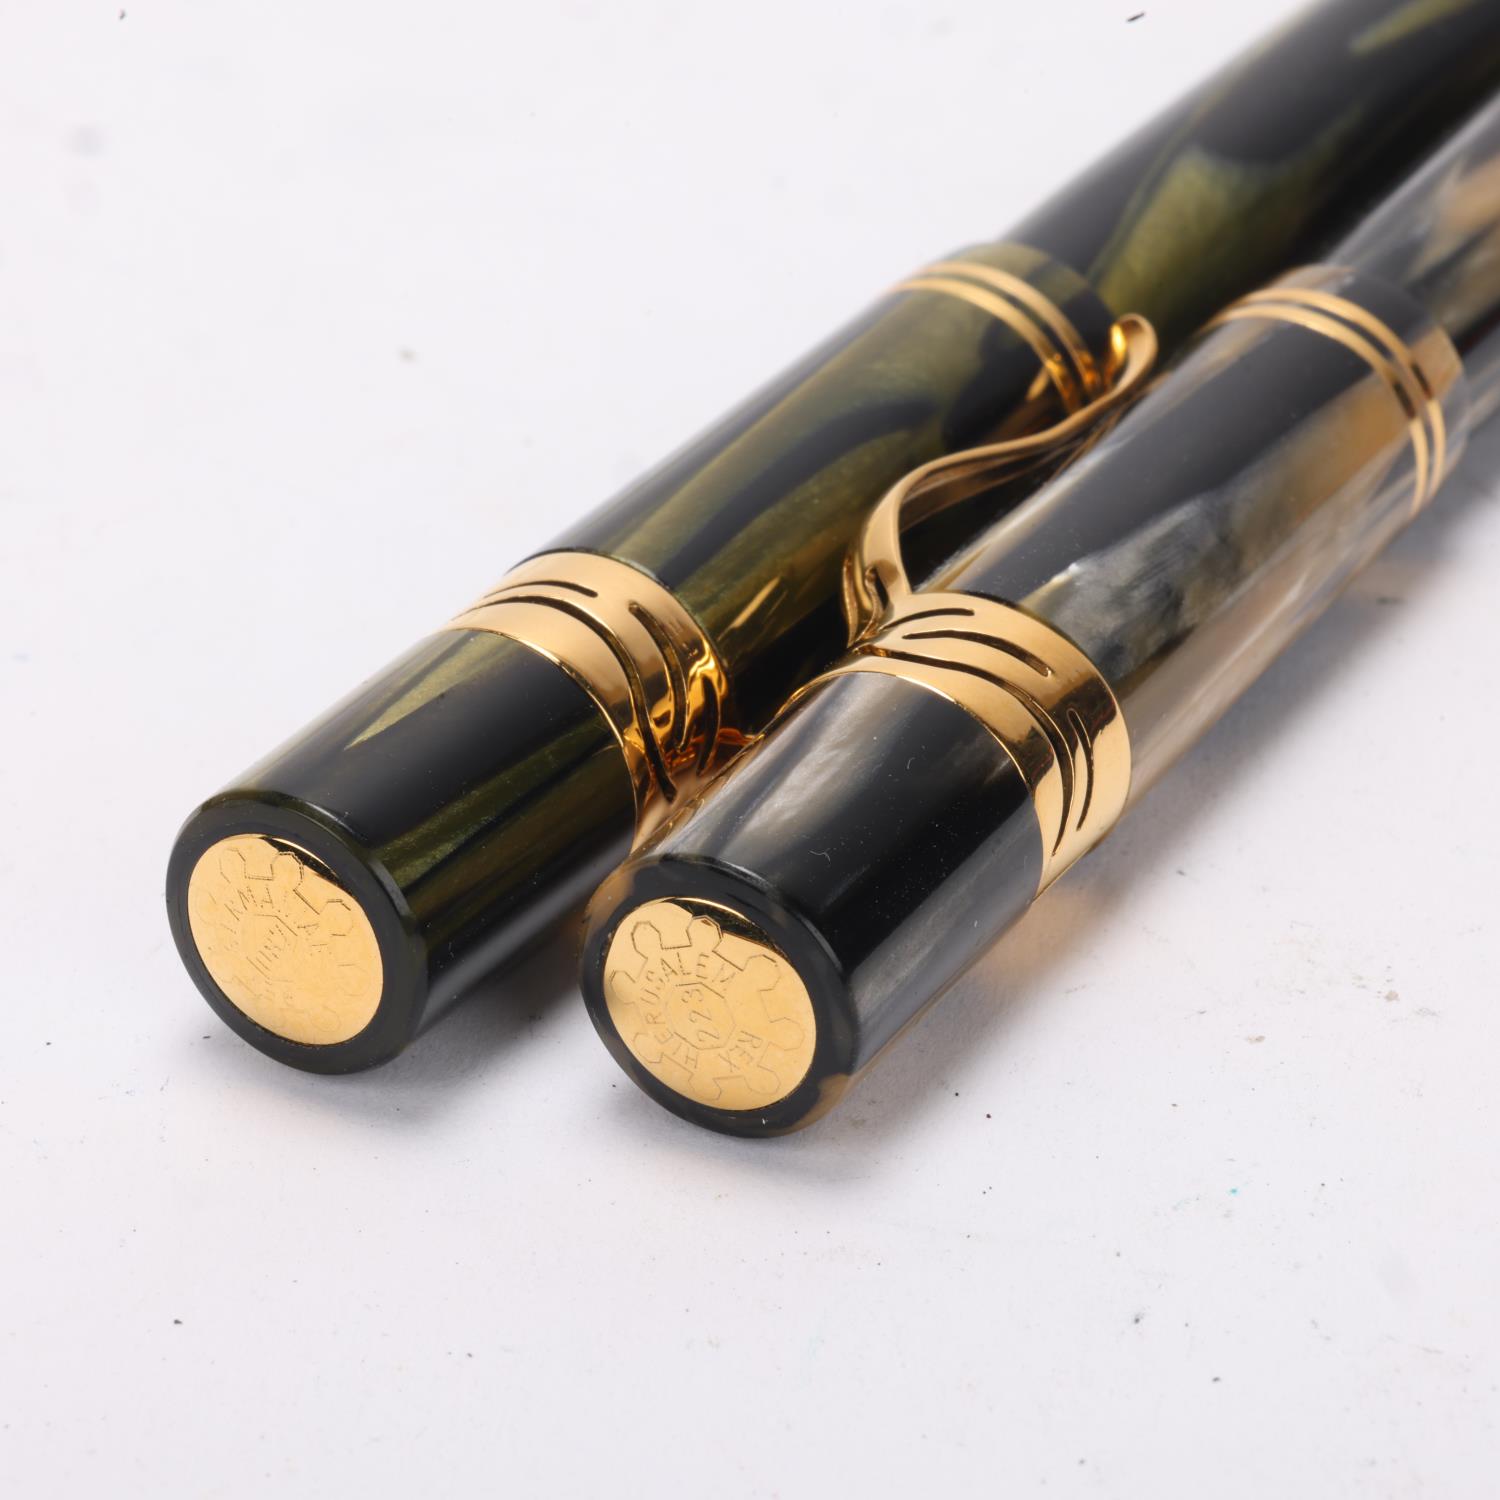 2 Visconti "Frederico II" fountain pens, piston fill with marbled body, limited edition of 800, both - Bild 4 aus 4